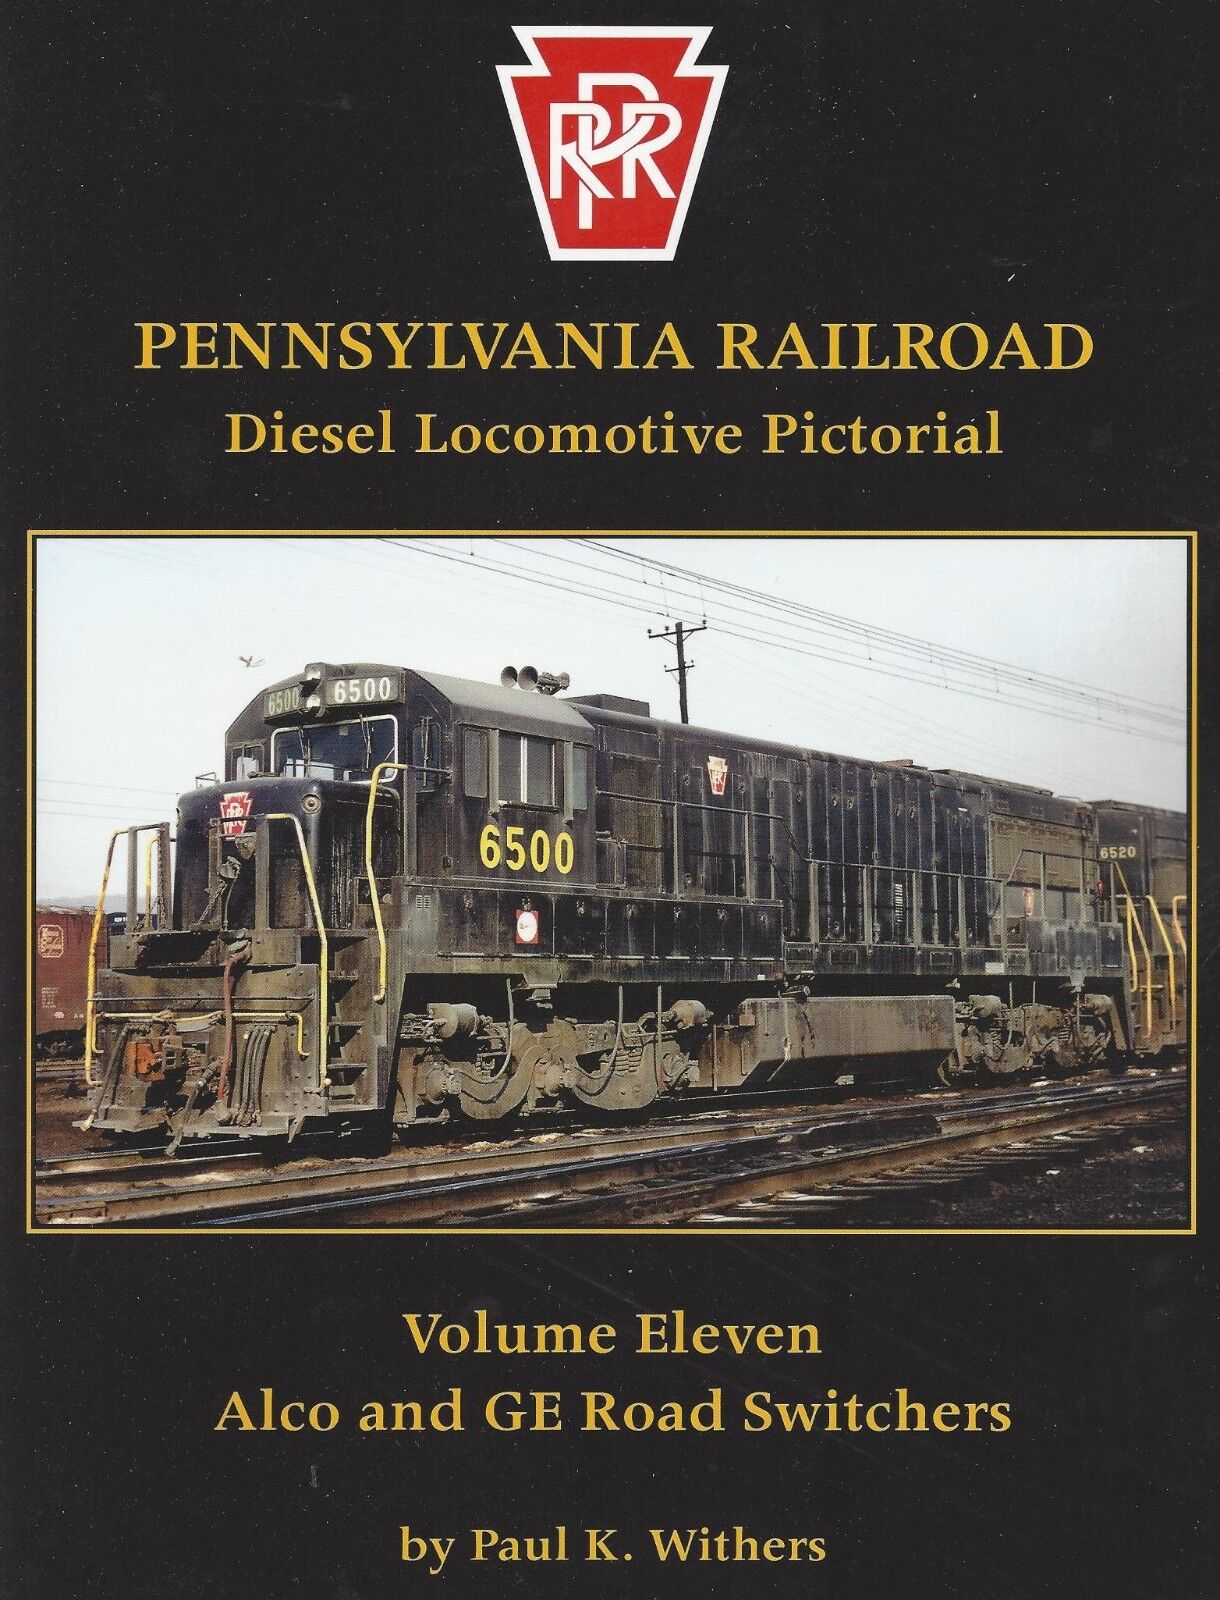 PRR Diesel Locomotive Pictorial, Vol. 11 – ALCo and GE Road Switchers (NEW BOOK)